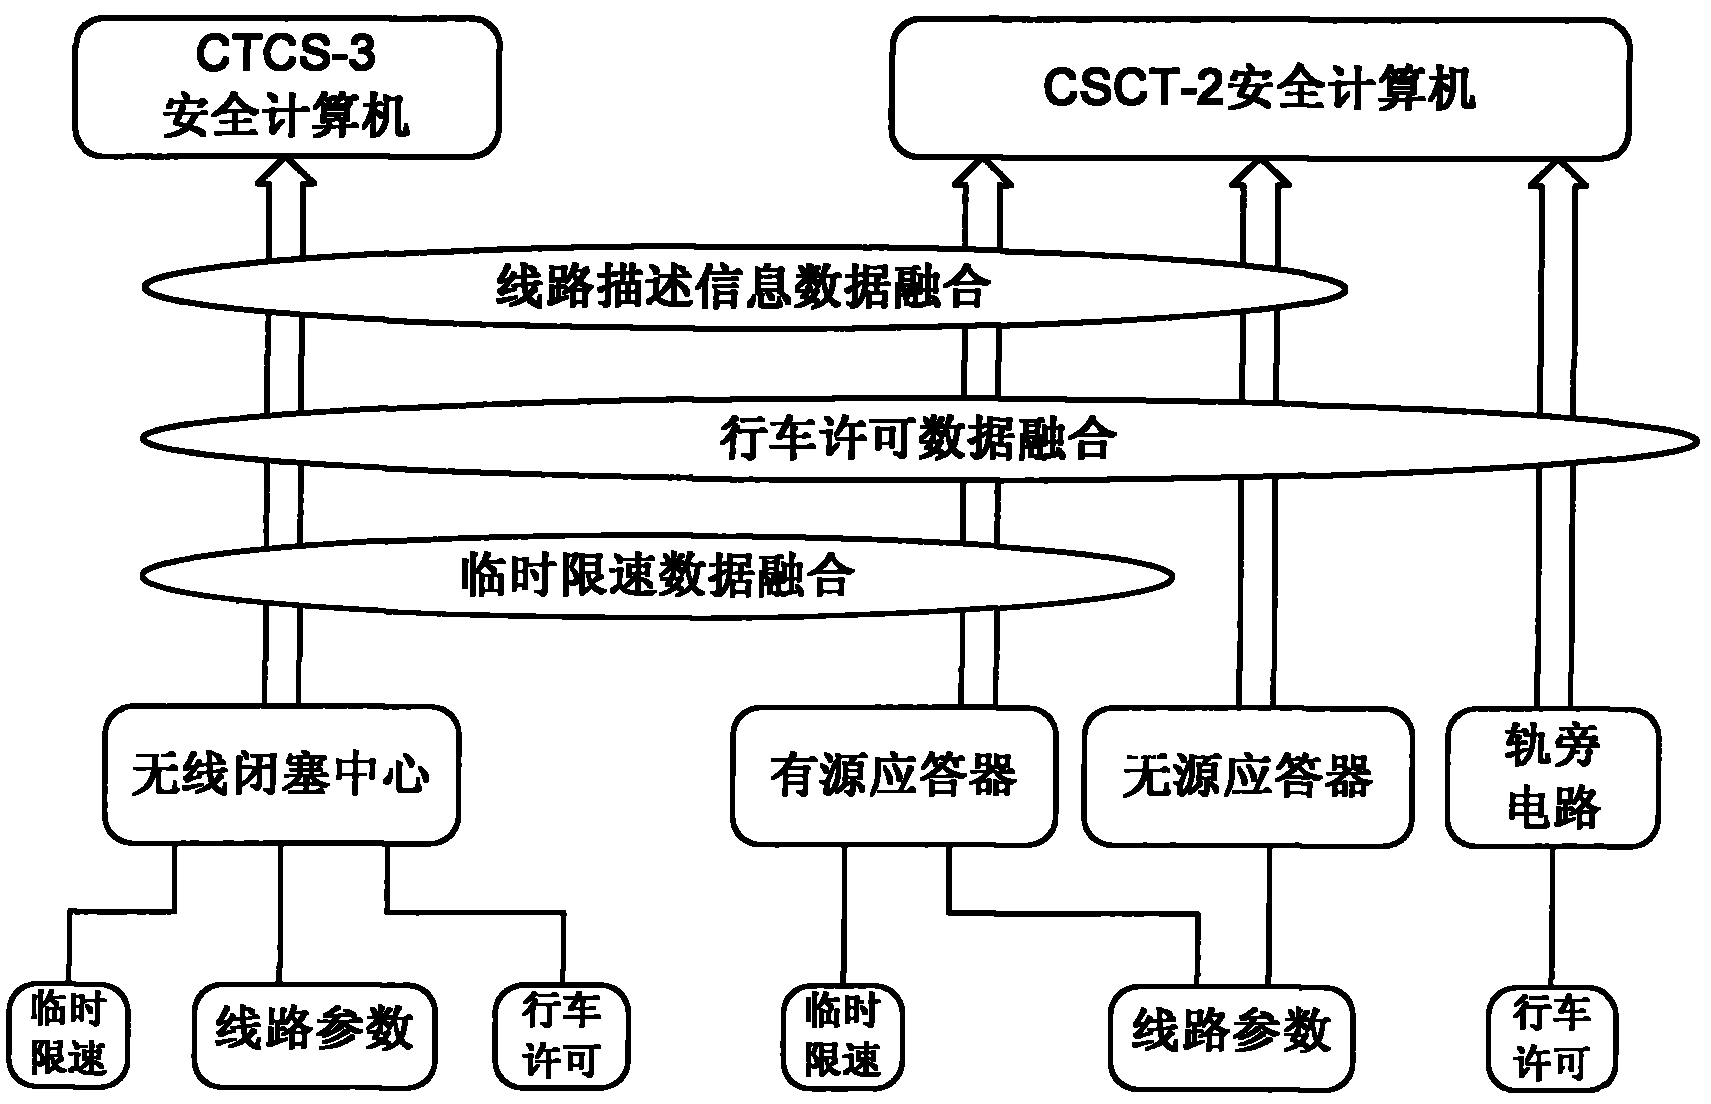 Method for improving safety of CTCS-3 (Chinese train control system-3) train control system